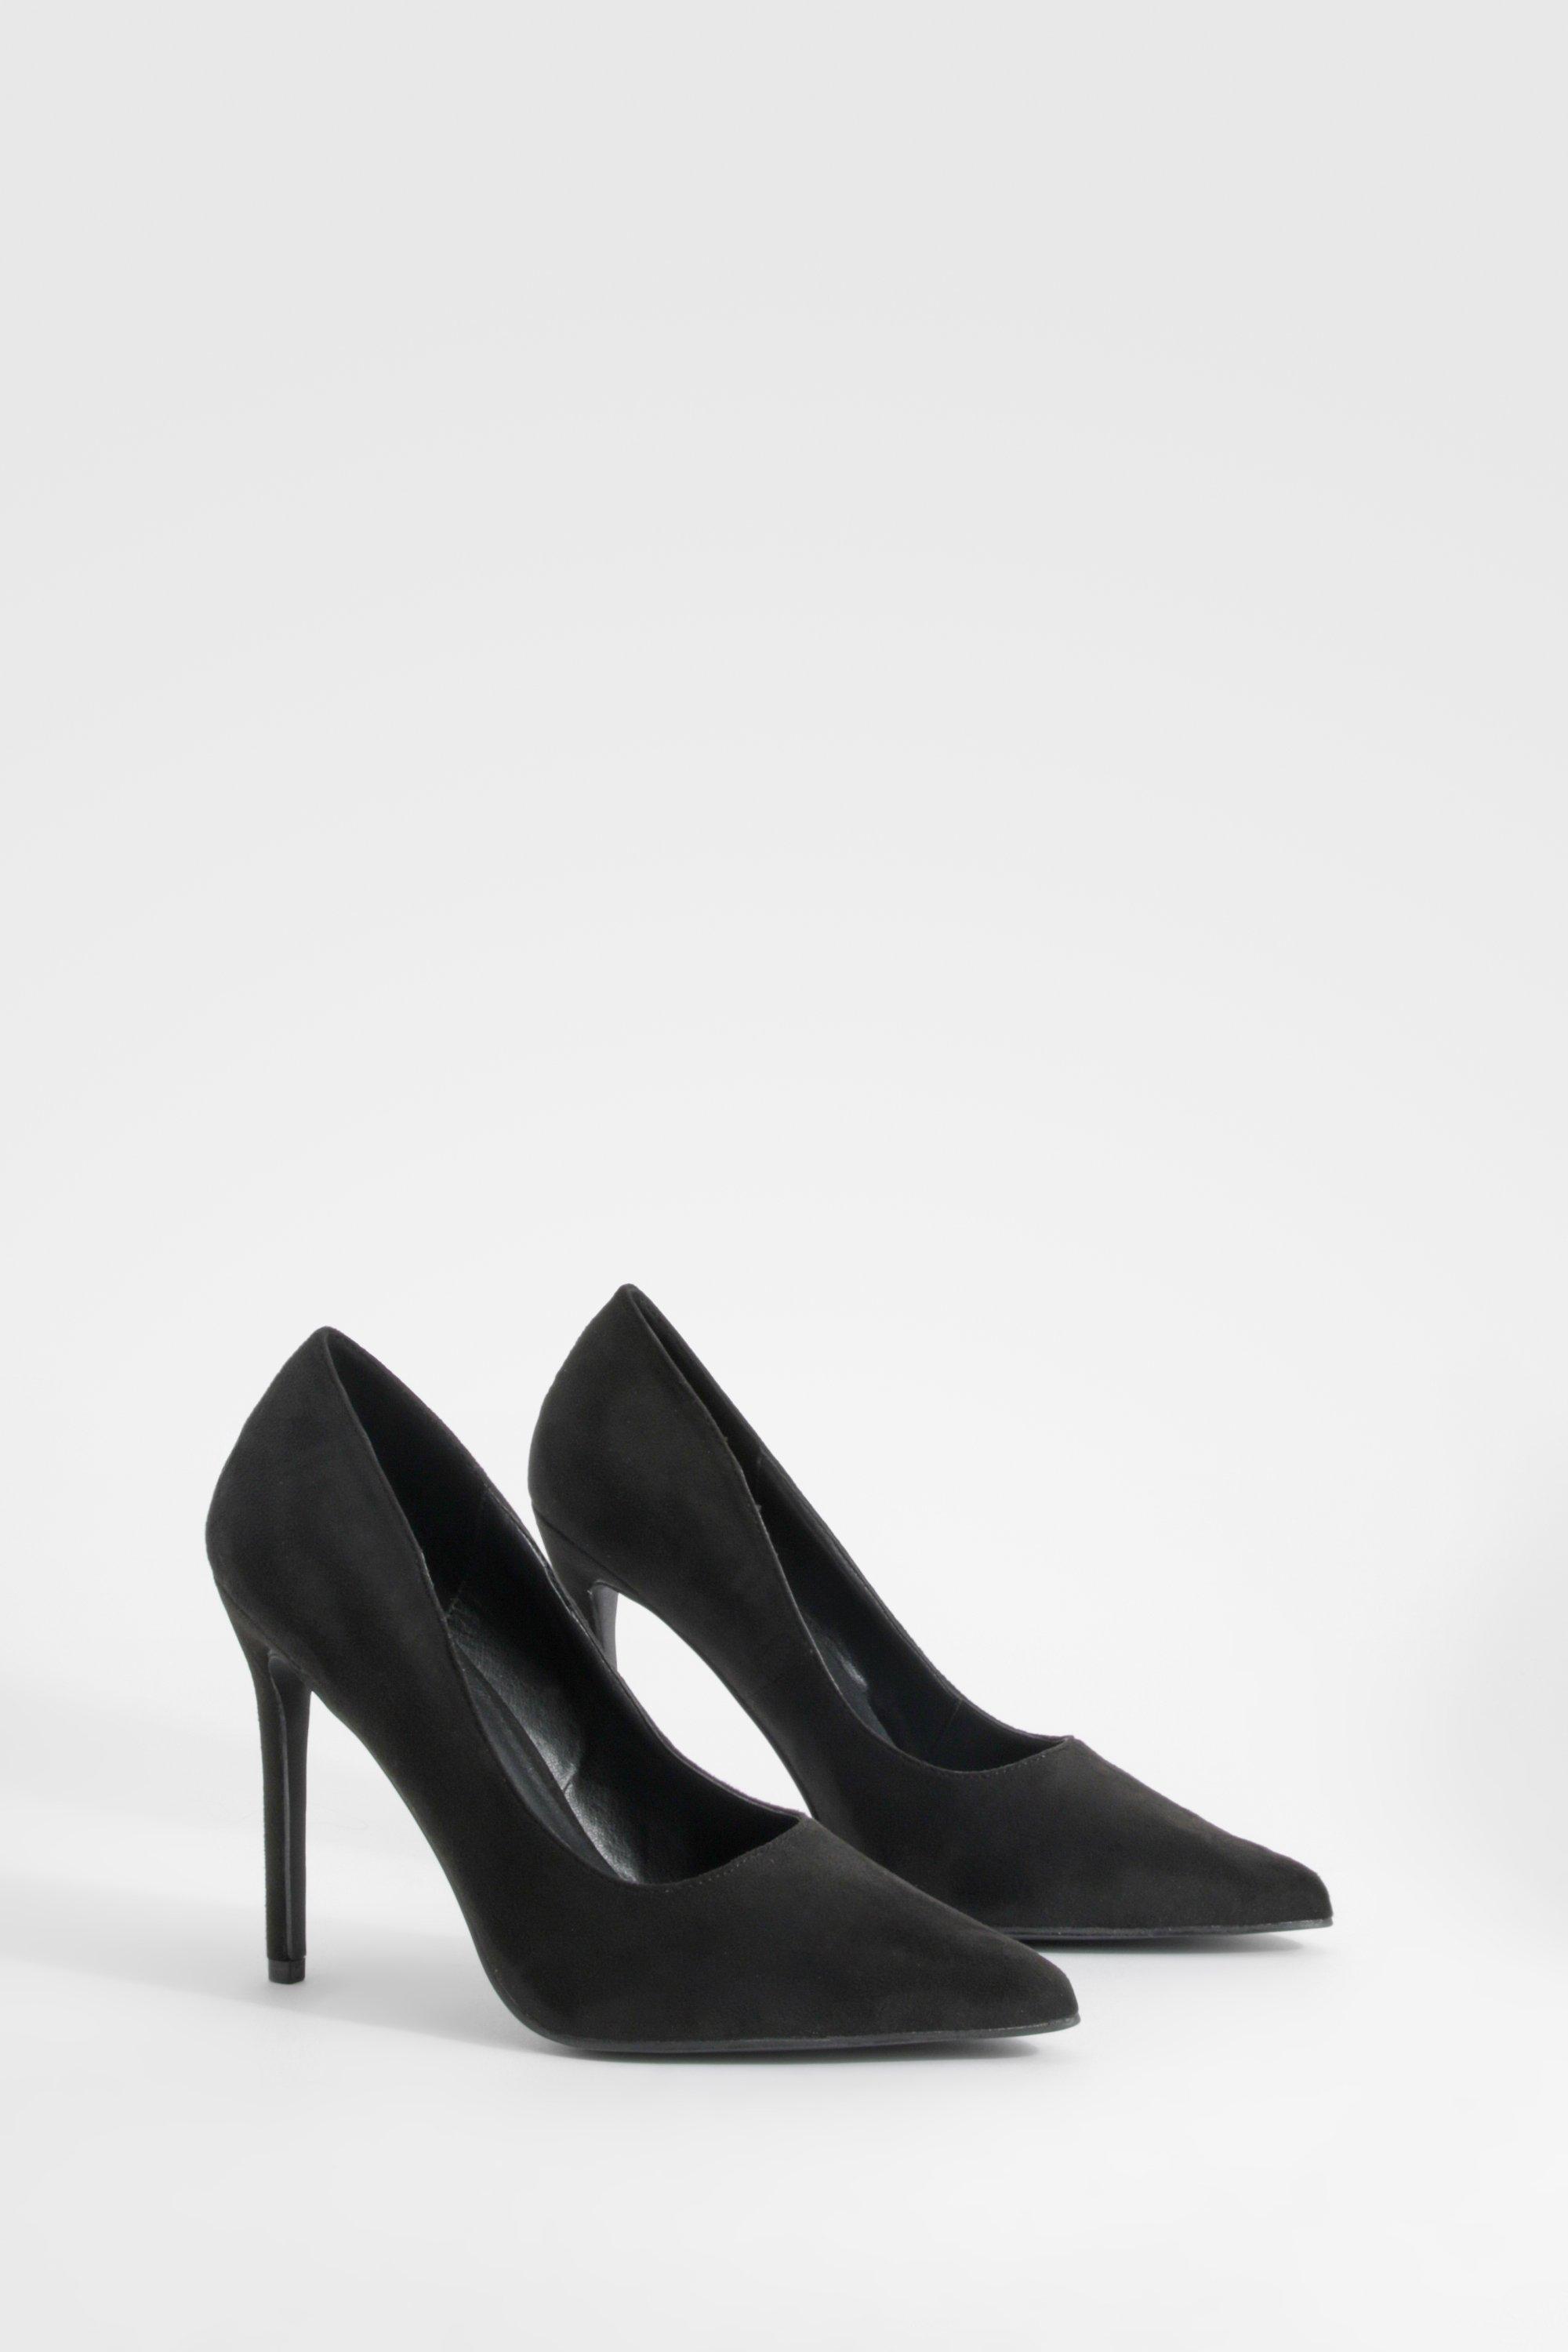 Image of High Stiletto Court Shoes, Nero